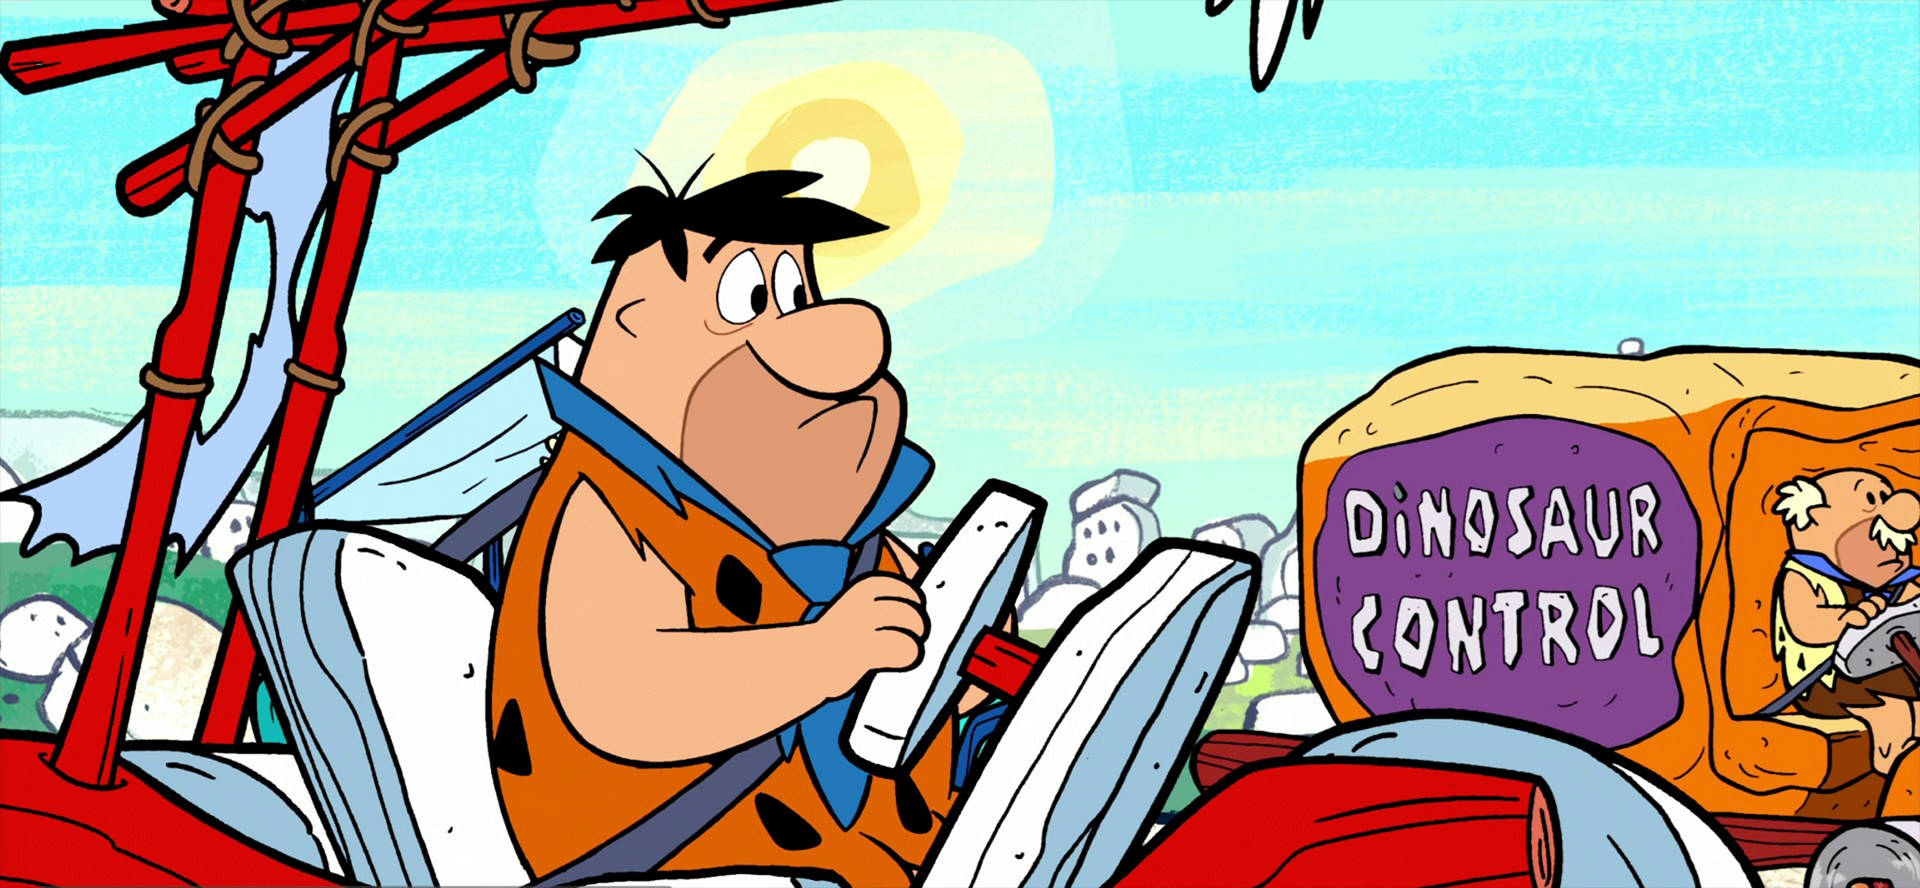 Fredflintstone Flintmobile I Wwe Smackdown. (the Sentence Remains The Same In Swedish As It Already Mentions The Subject And Context.) Wallpaper